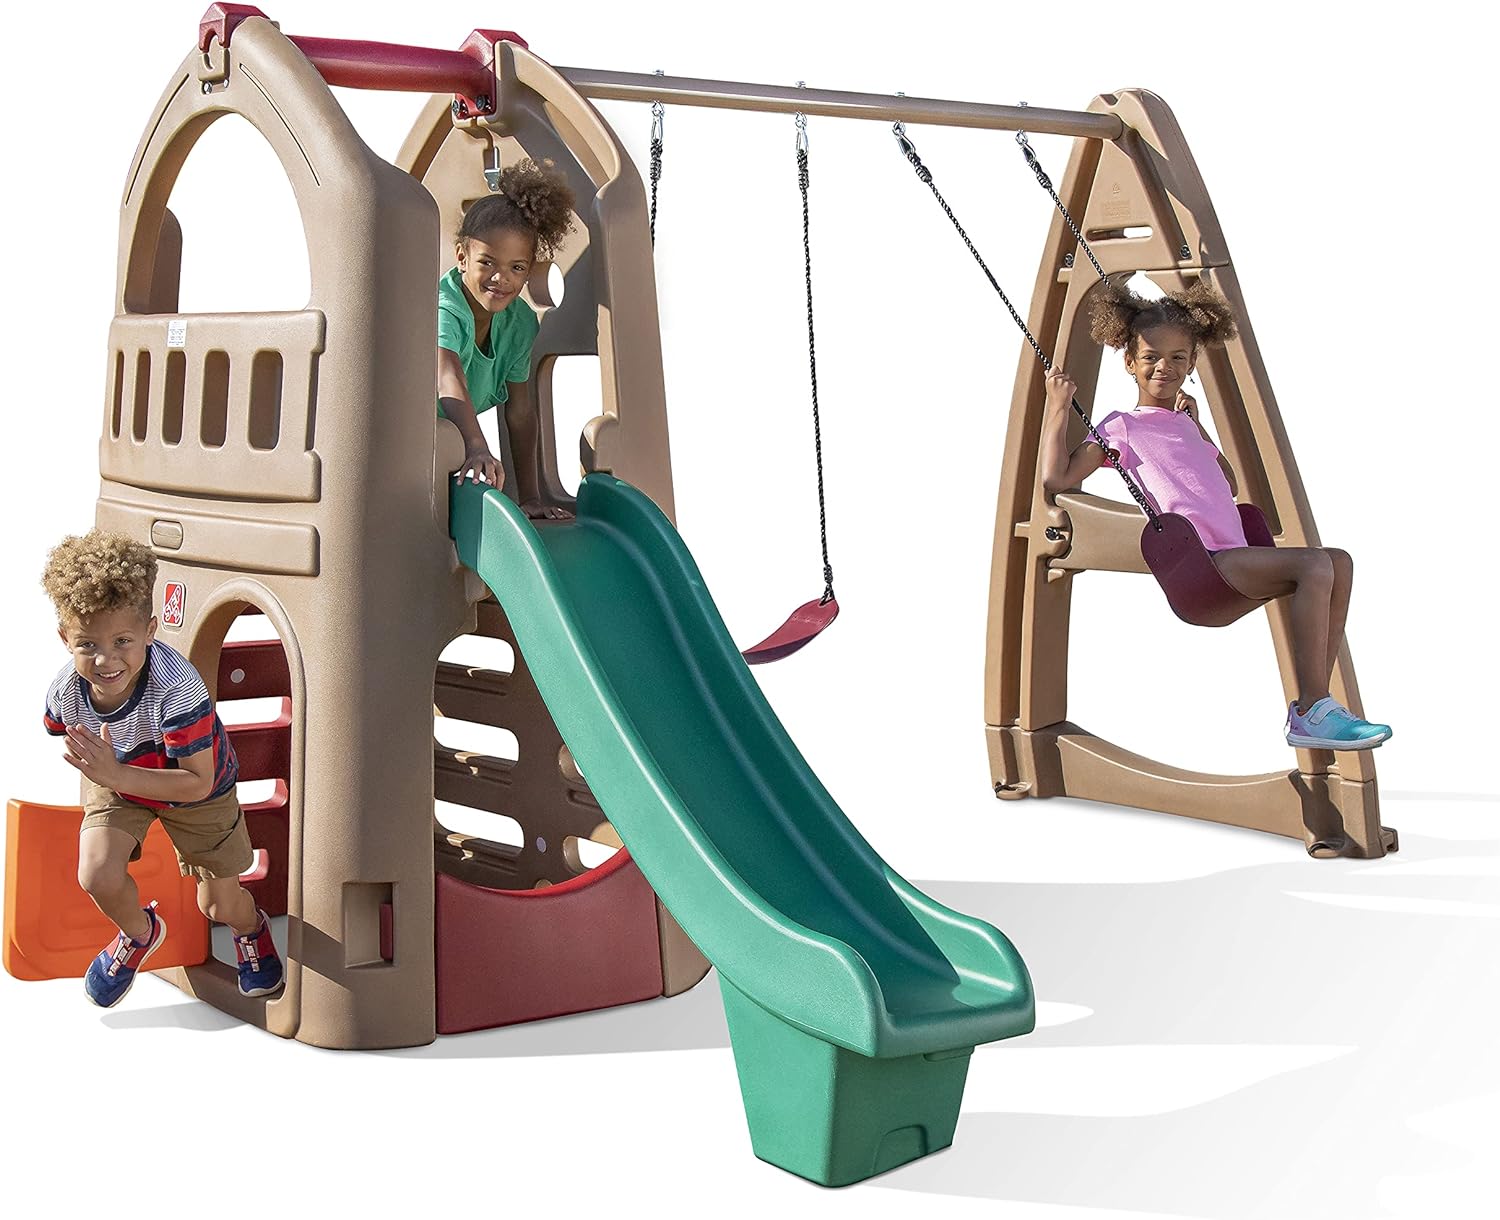 Step2 Naturally Playful Playhouse Climber & Swing Set Extension for Kids